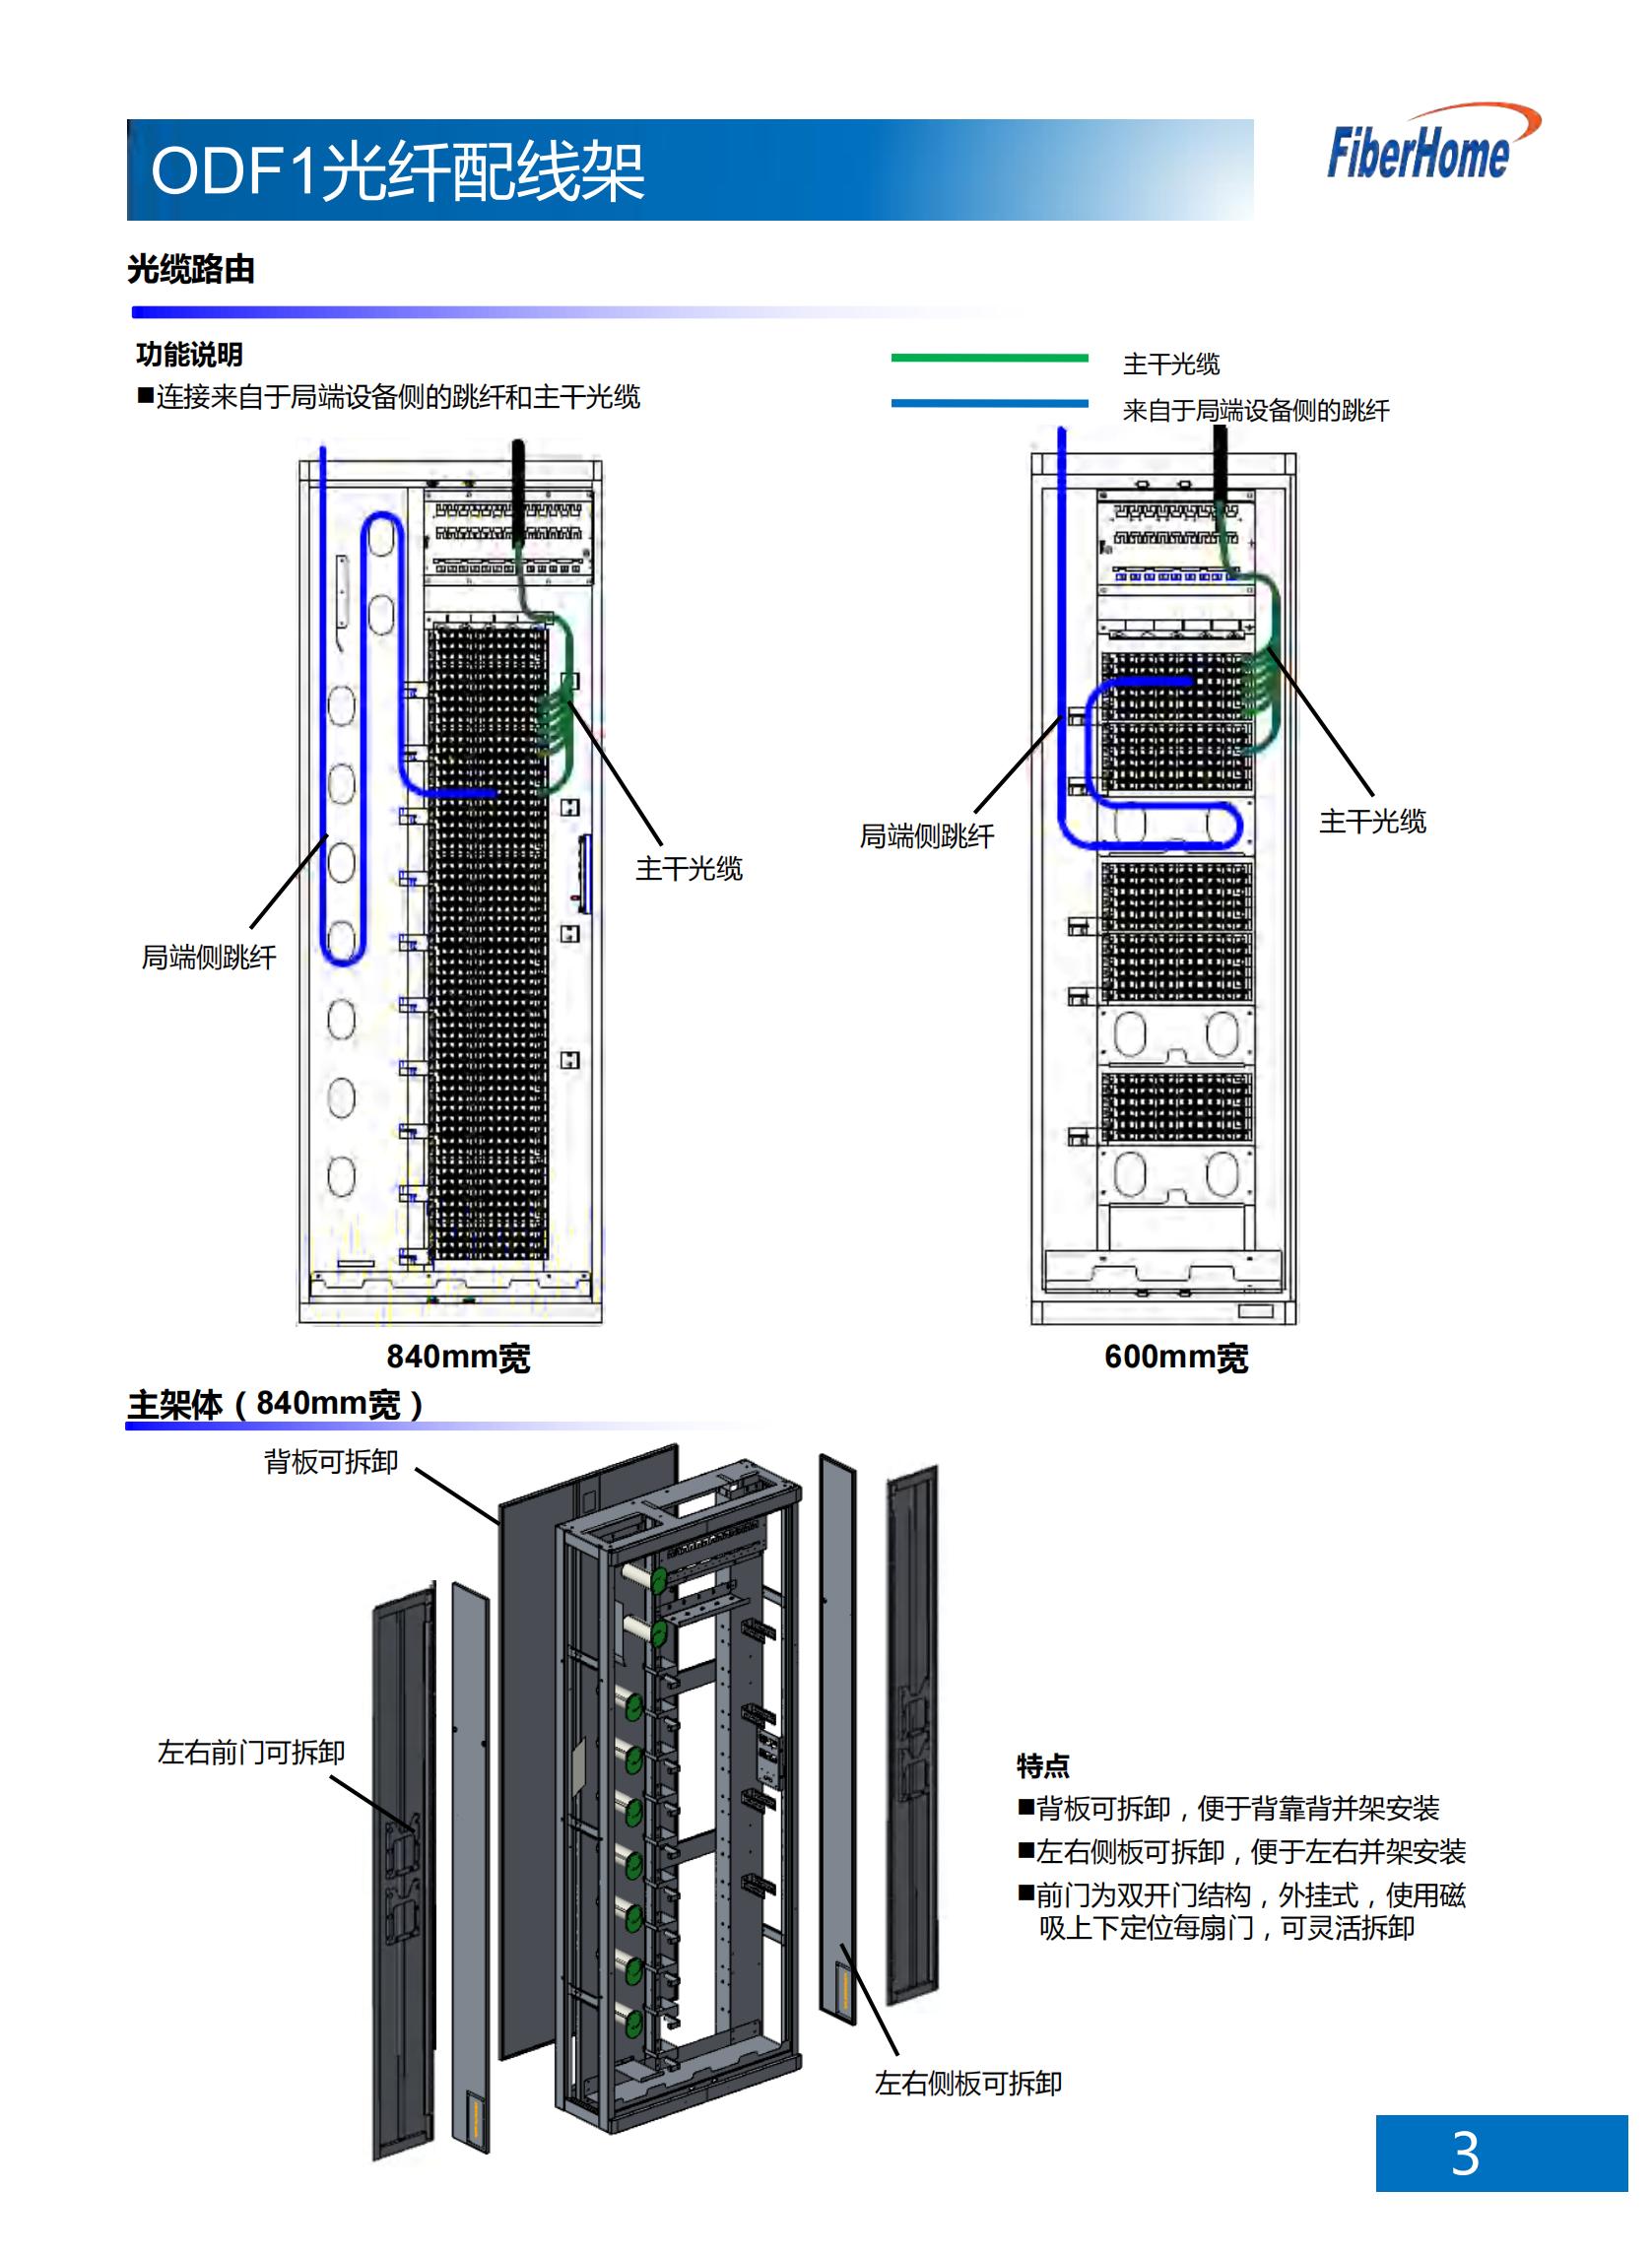 ODF101-864-A1-FC ODF optical fiber distribution frame (864-core floor type without sub-frame type, all of which include 12-core FC fusion integration unit)